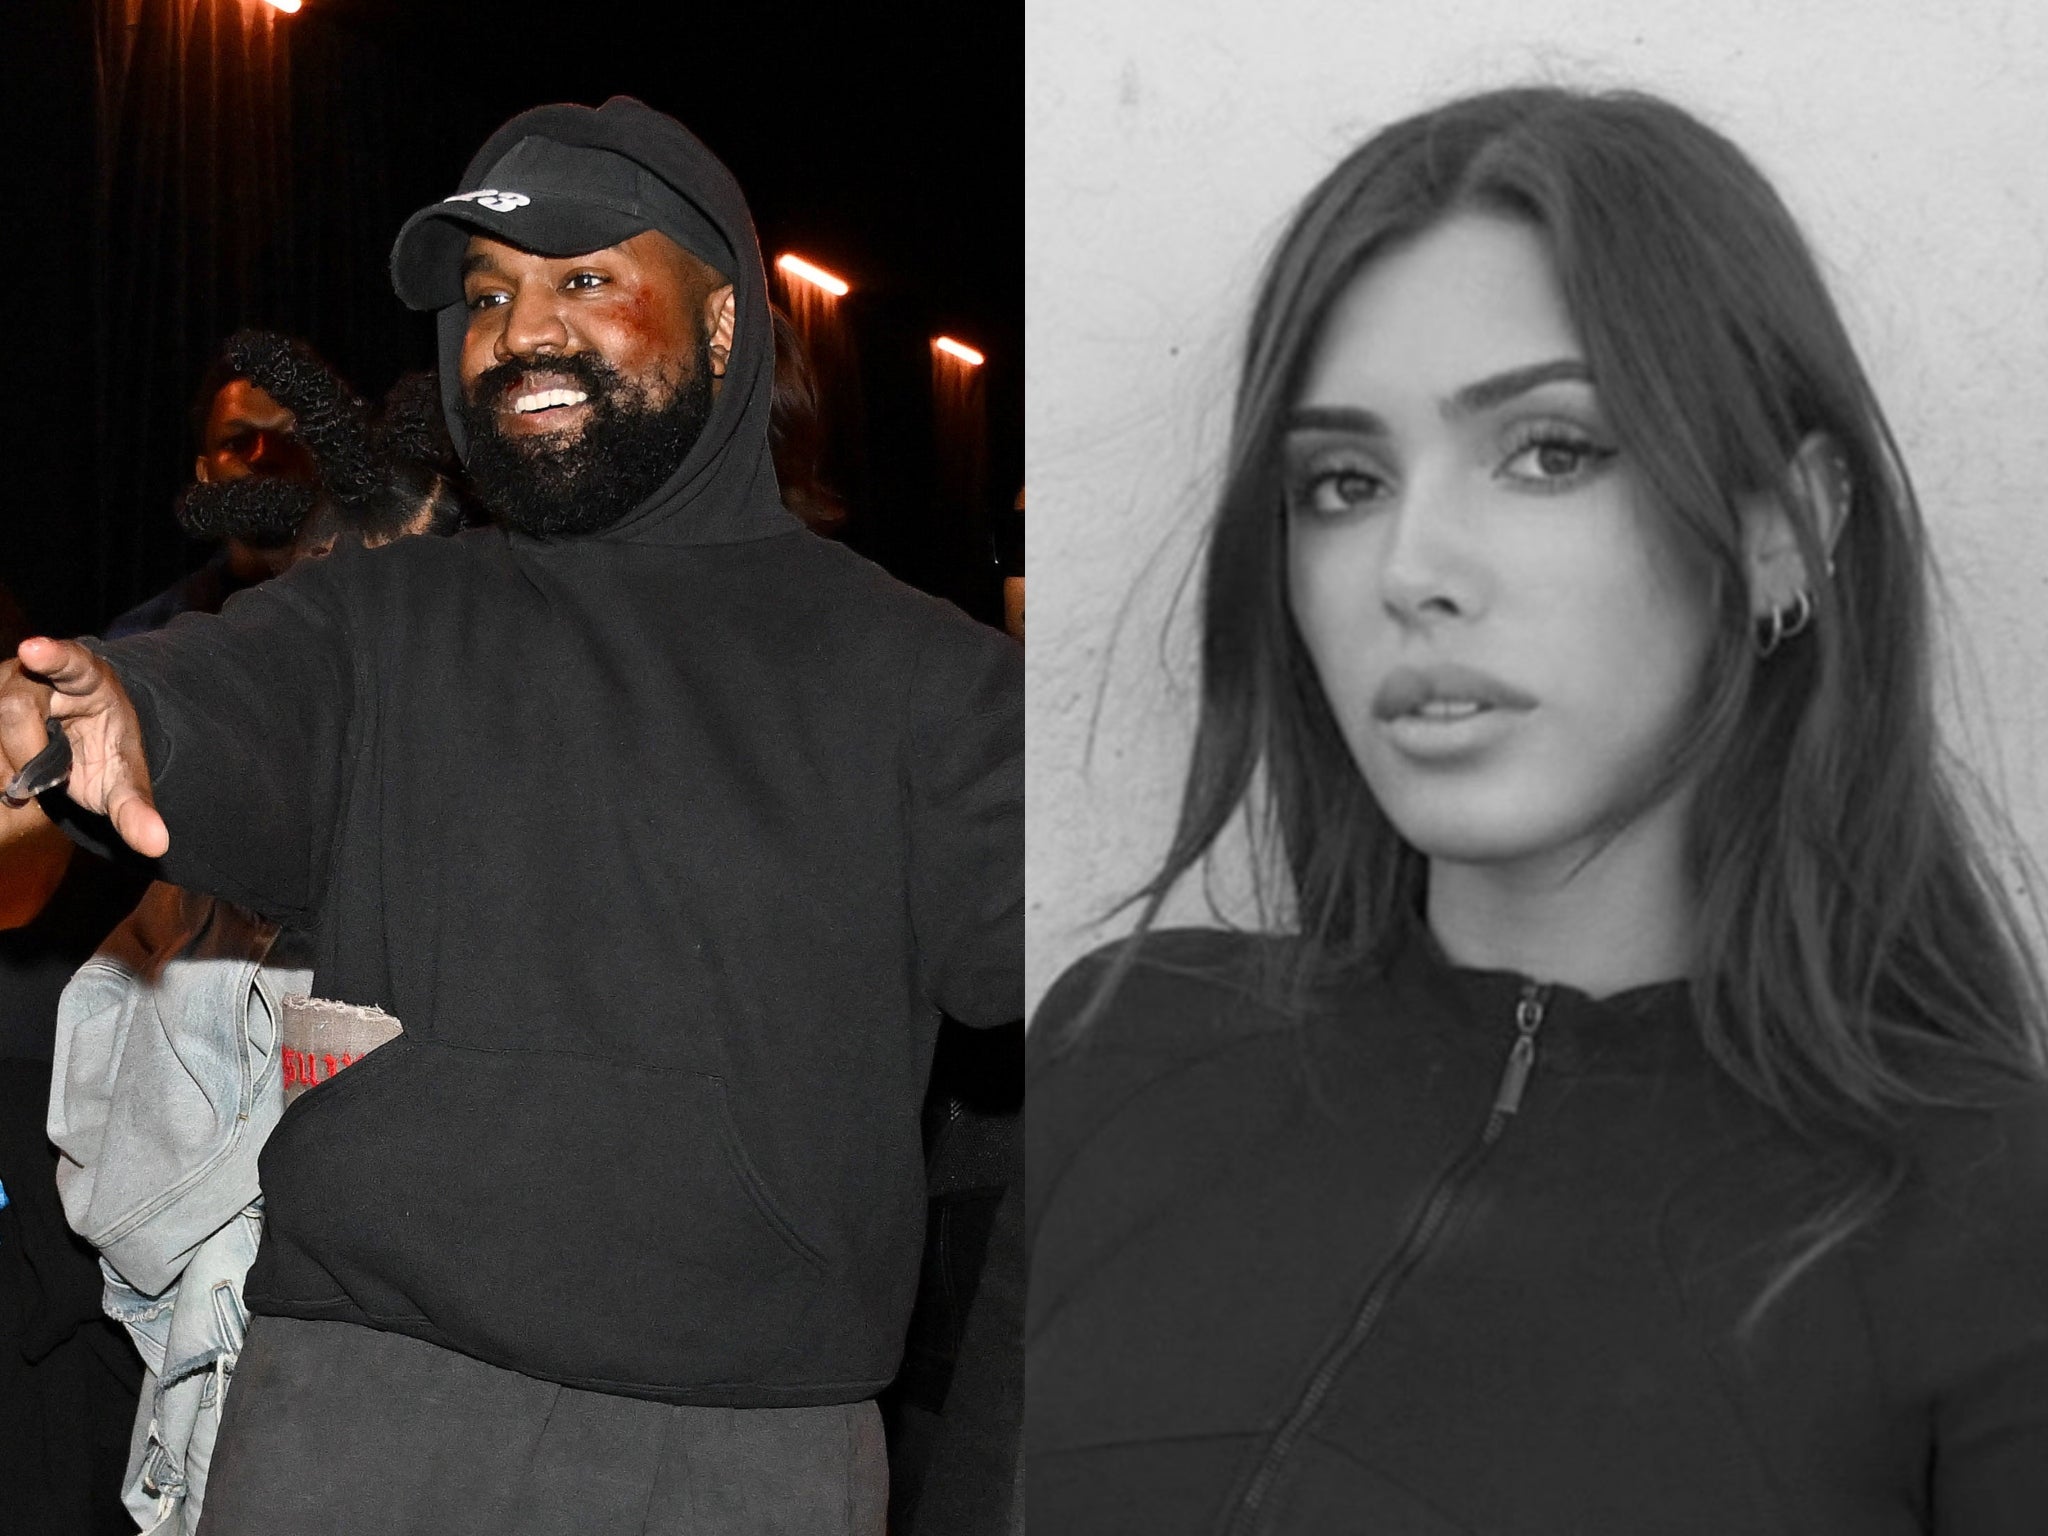 Kanye West's wife wears a risqué design for fashion label Mowalola